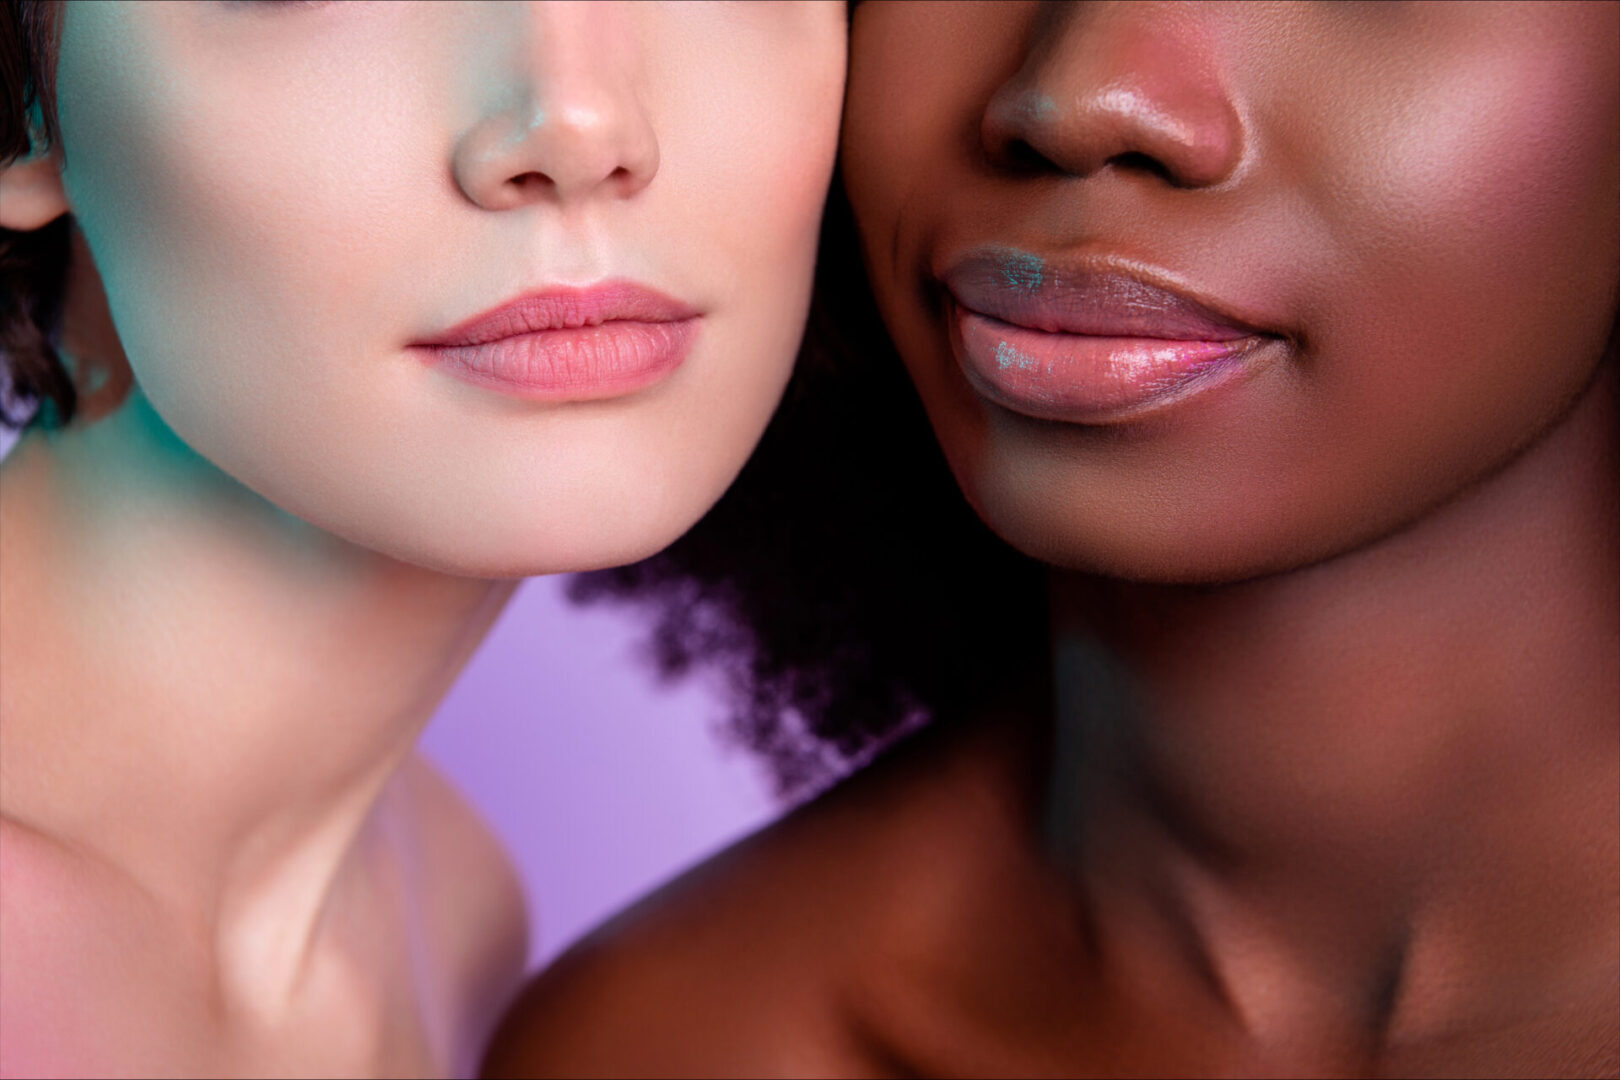 Two women with different skin tones and one is white